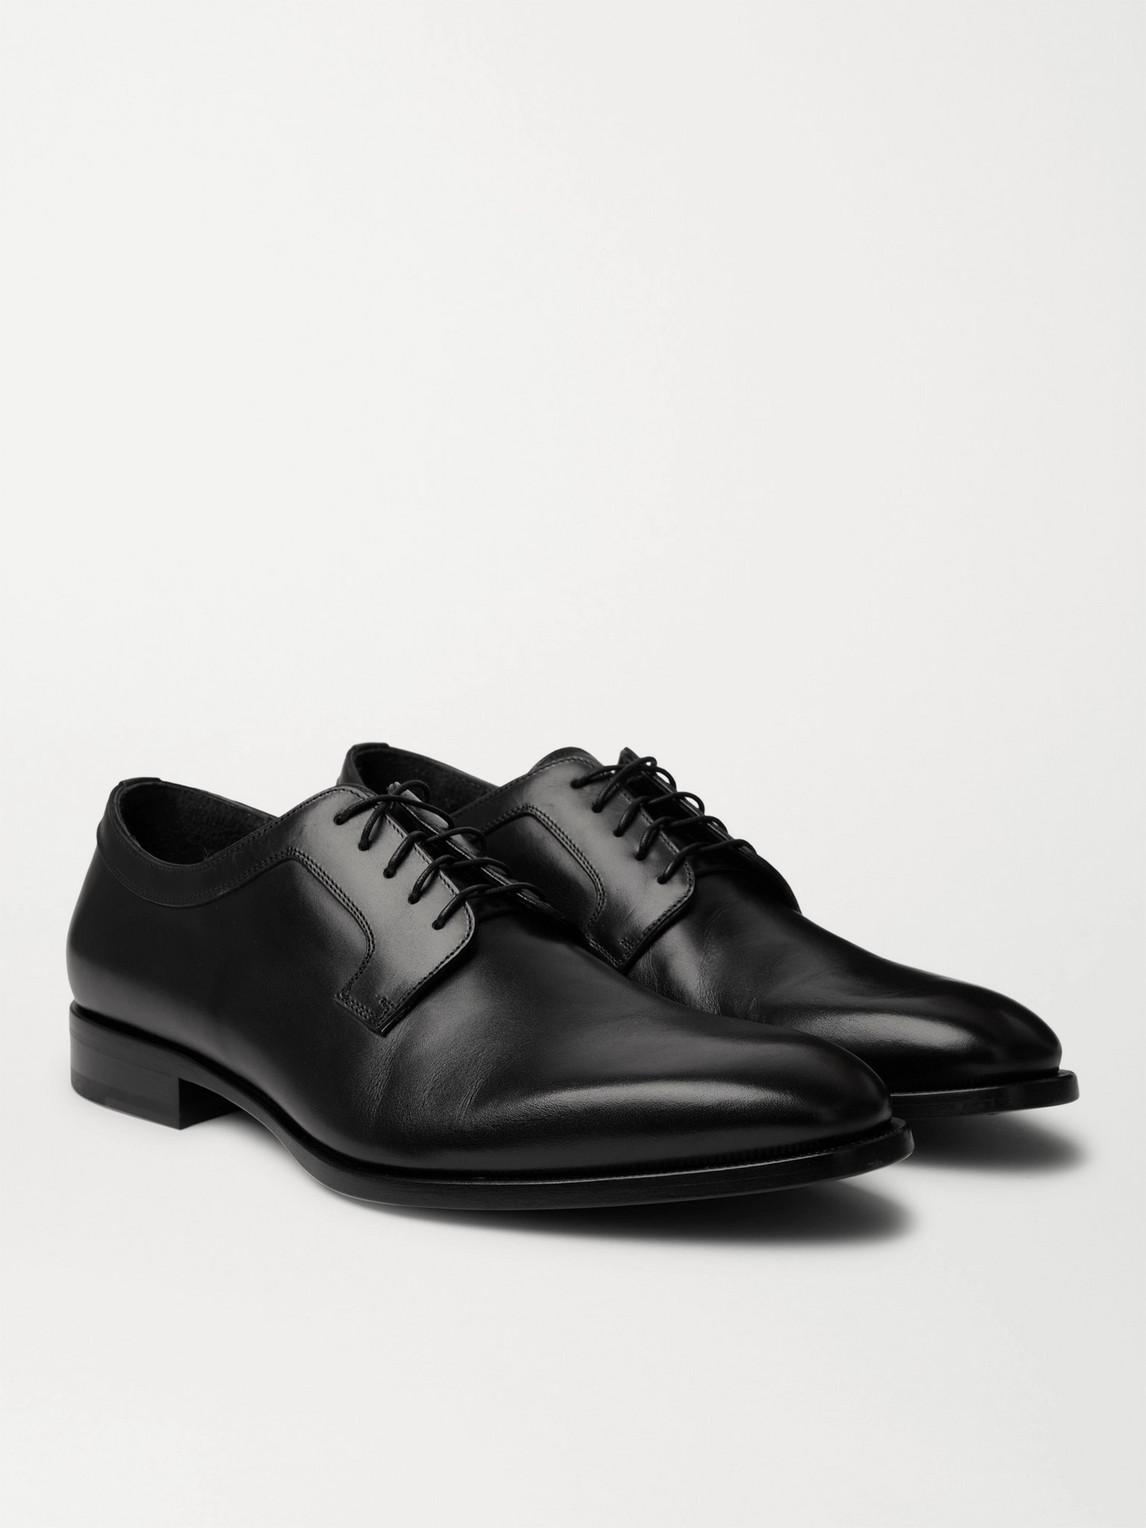 DUNHILL LEATHER DERBY SHOES